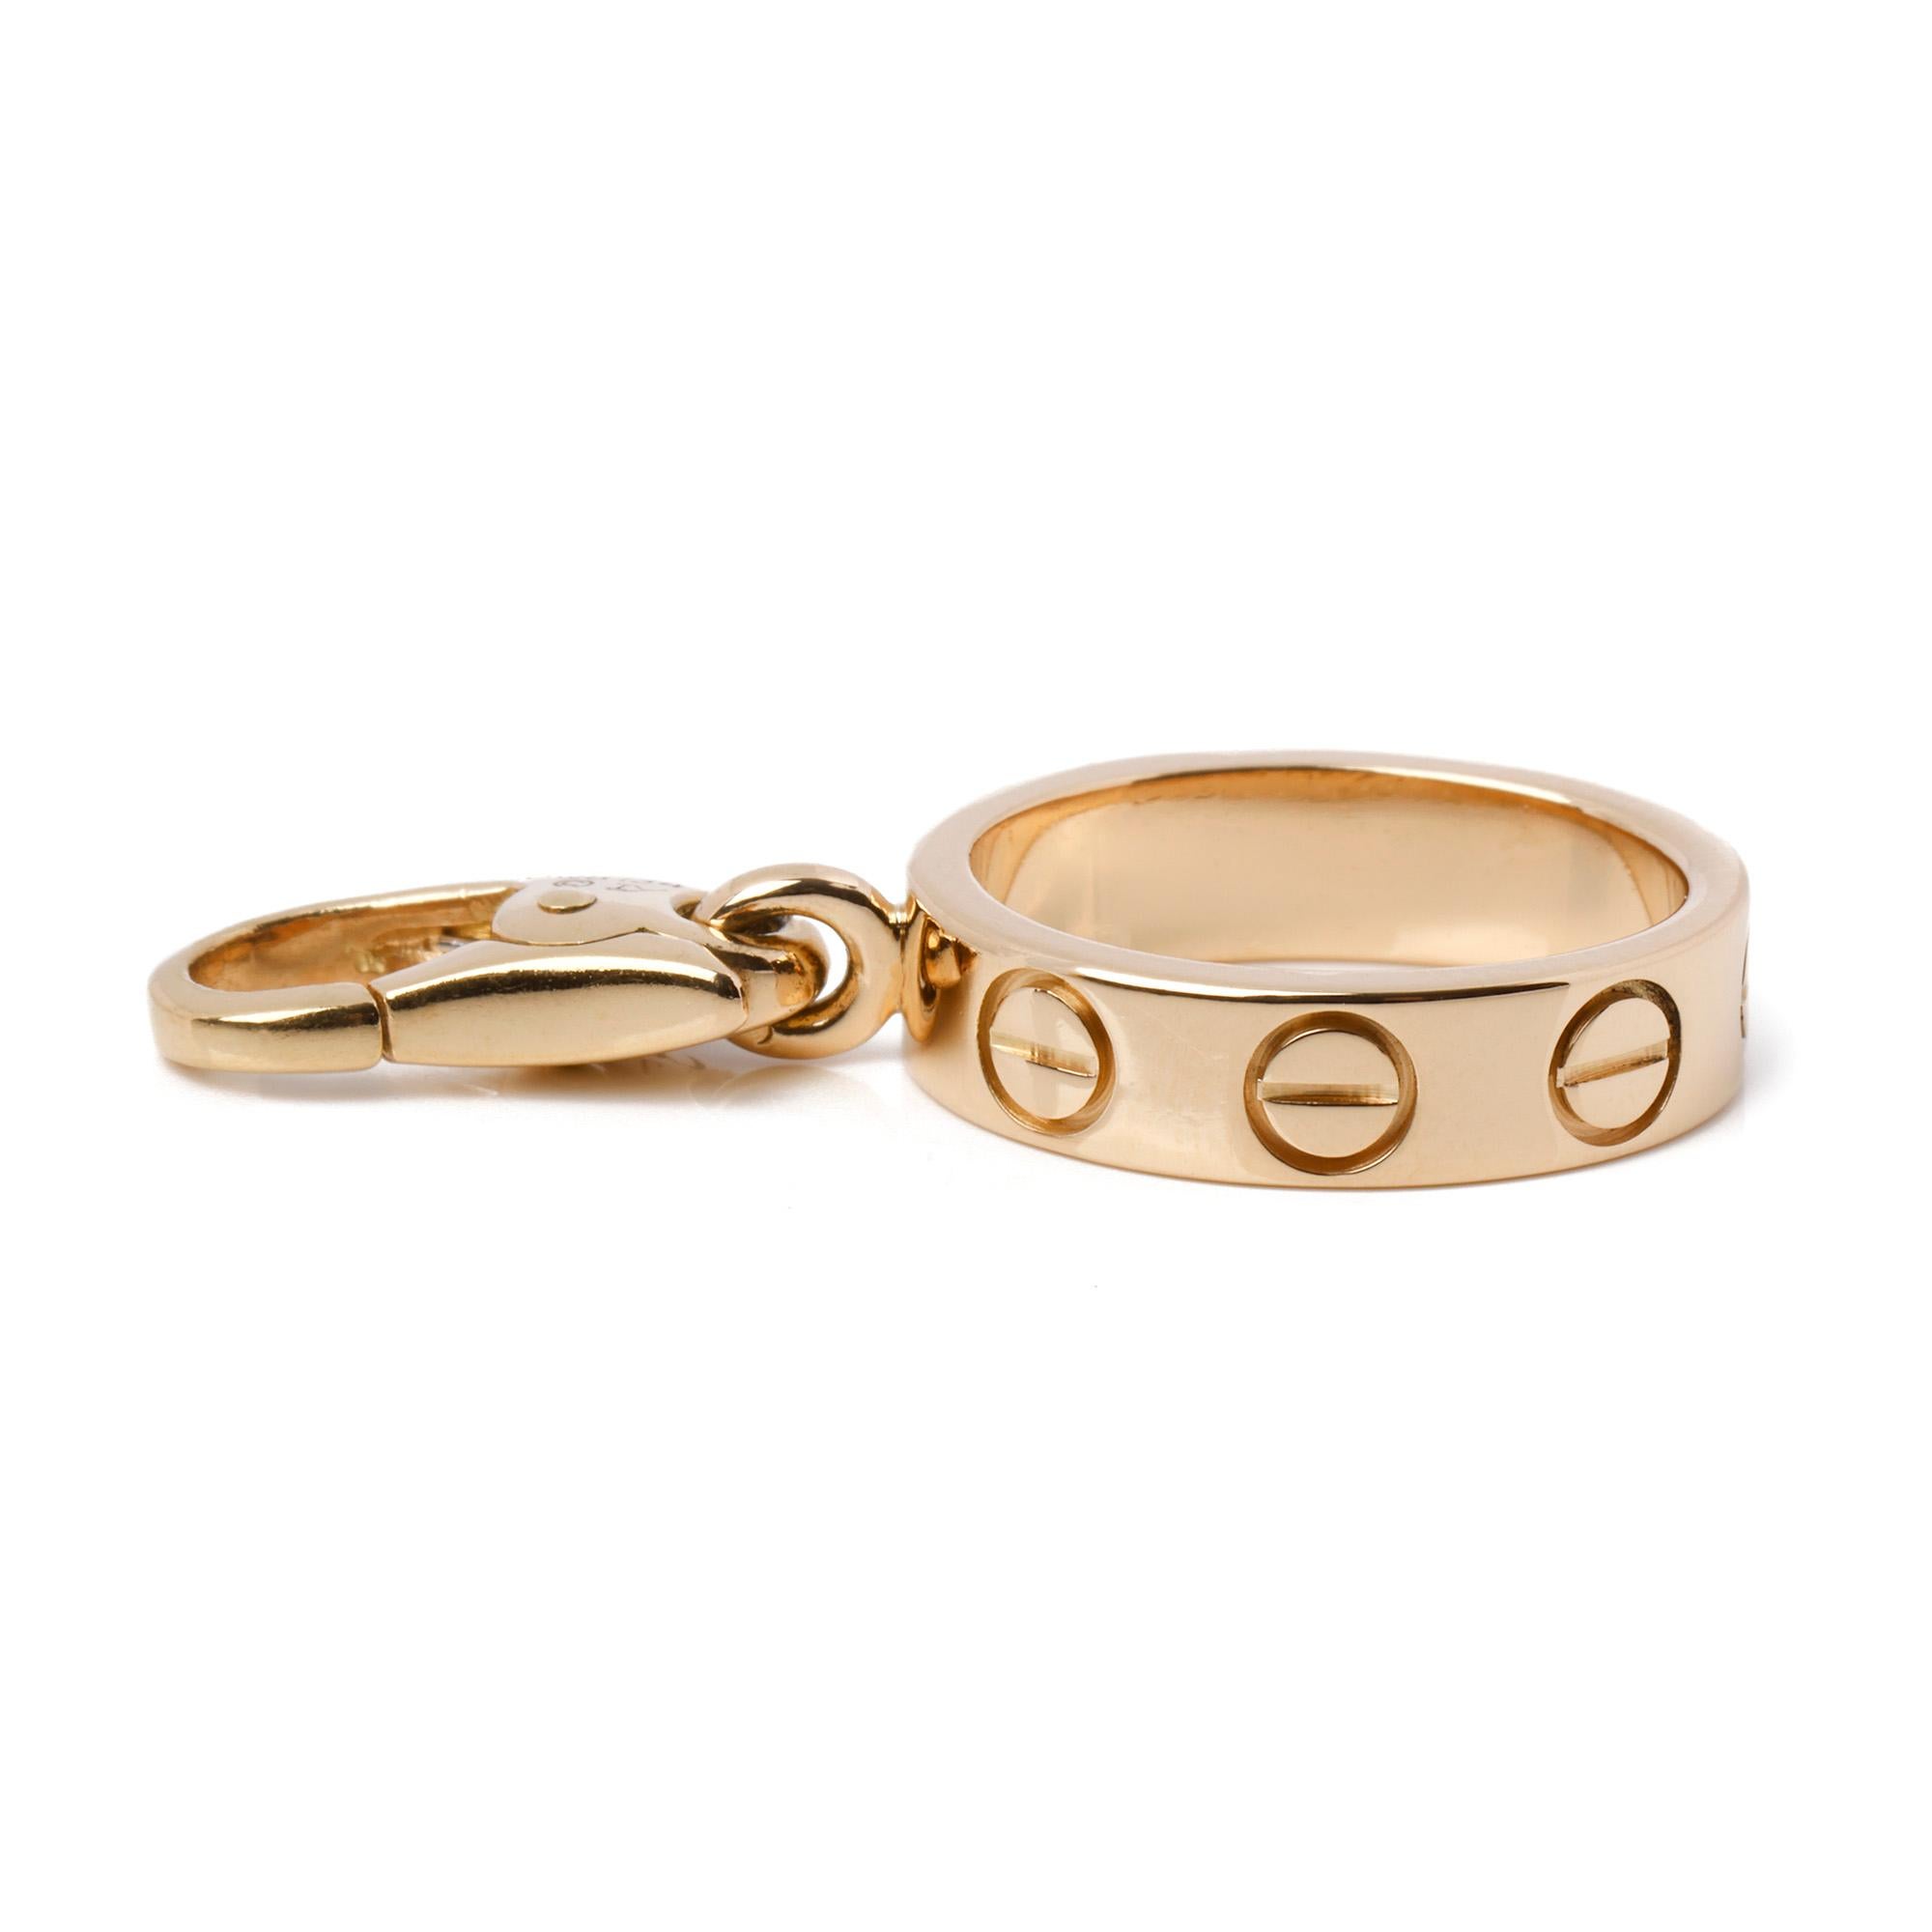 This charm by Cartier is from their Love range and features their iconic screw detailing in 18ct yellow gold. It can be worn as a charm on a bracelet or as a pendant on a chain and is accompanied by a Cartier box and certificate. Our Xupes reference